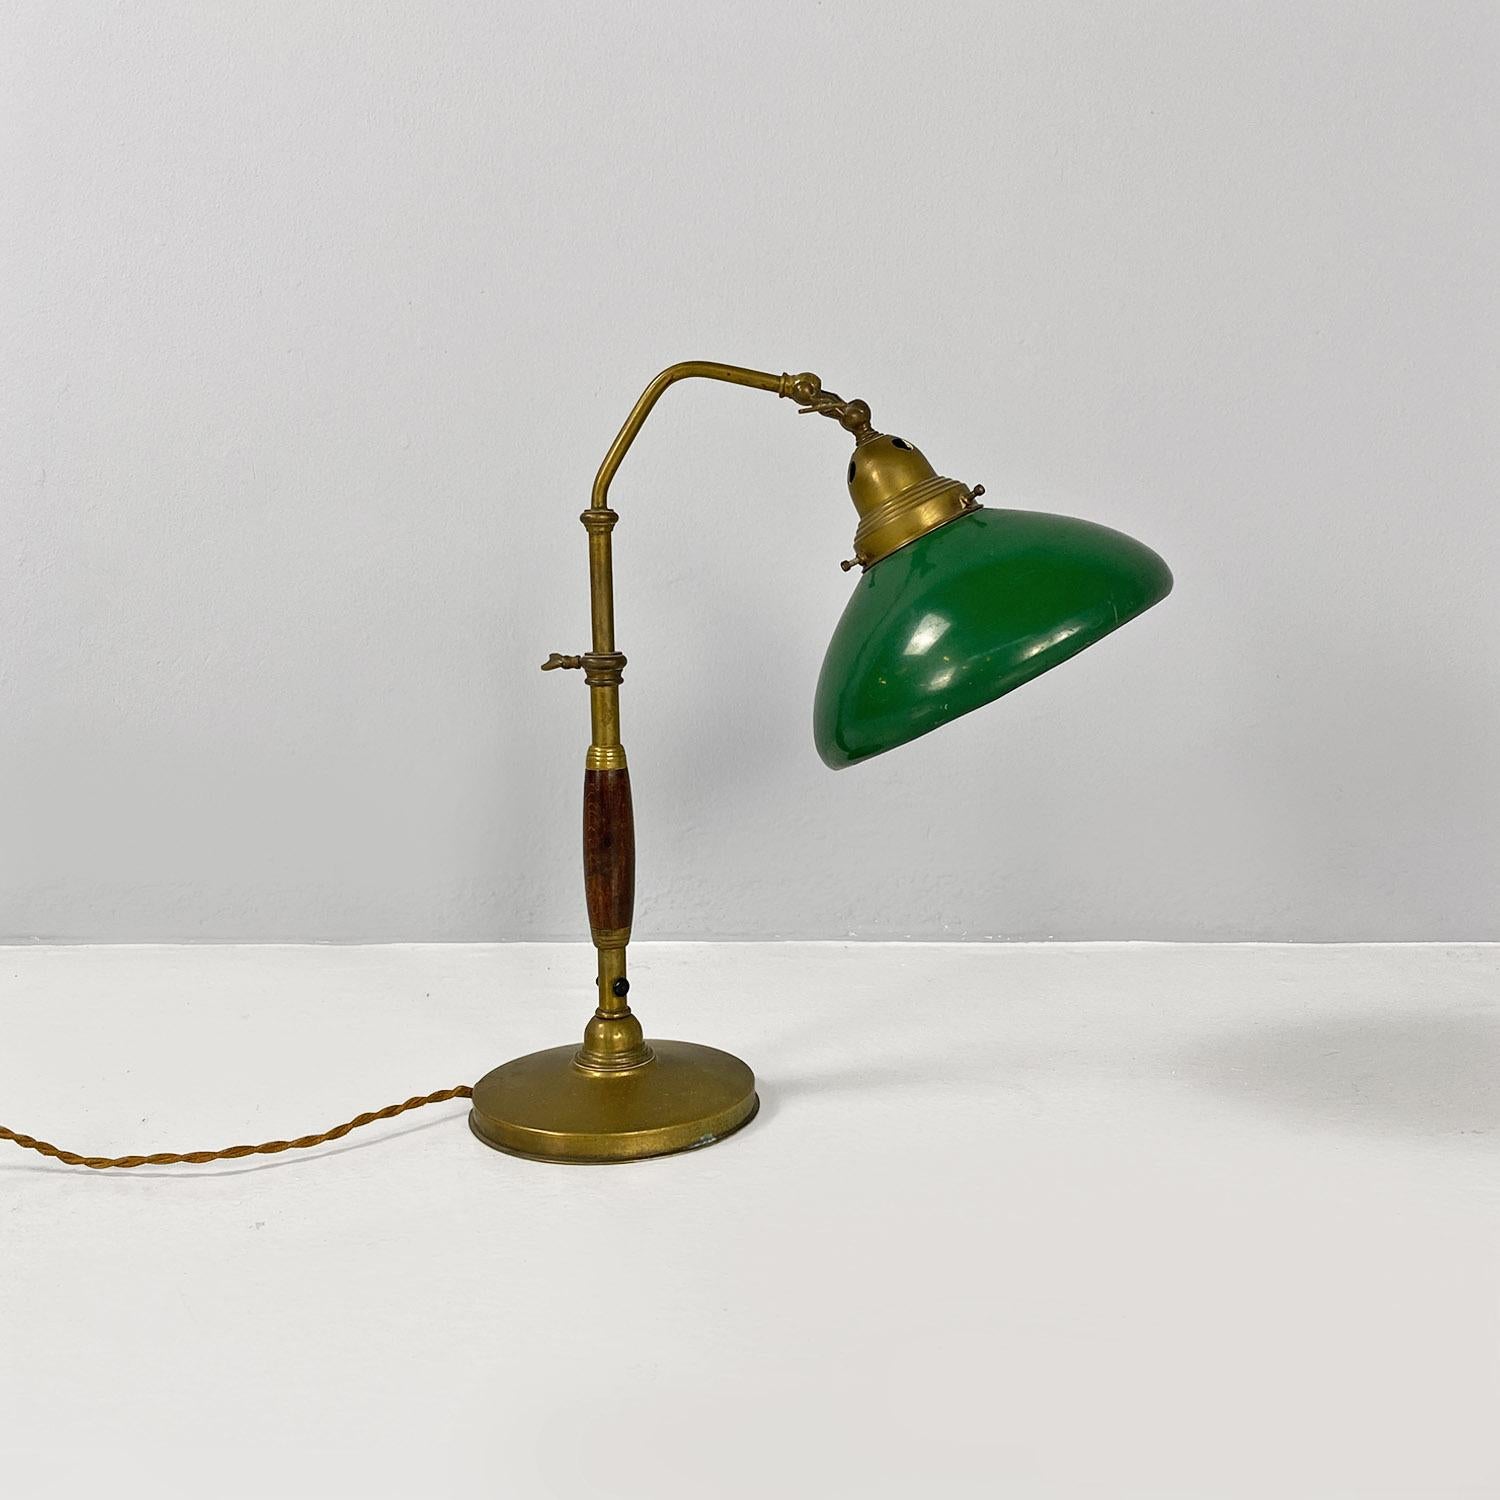 Ministerial table lamp with wood and metal stem and adjustable green enameled metal shade.
Ca.1920
Good Condition
Measurements in cm 30x15x43h
This serious-looking green and gold metal table lamp, owned by the Italian Ministry as reported by the